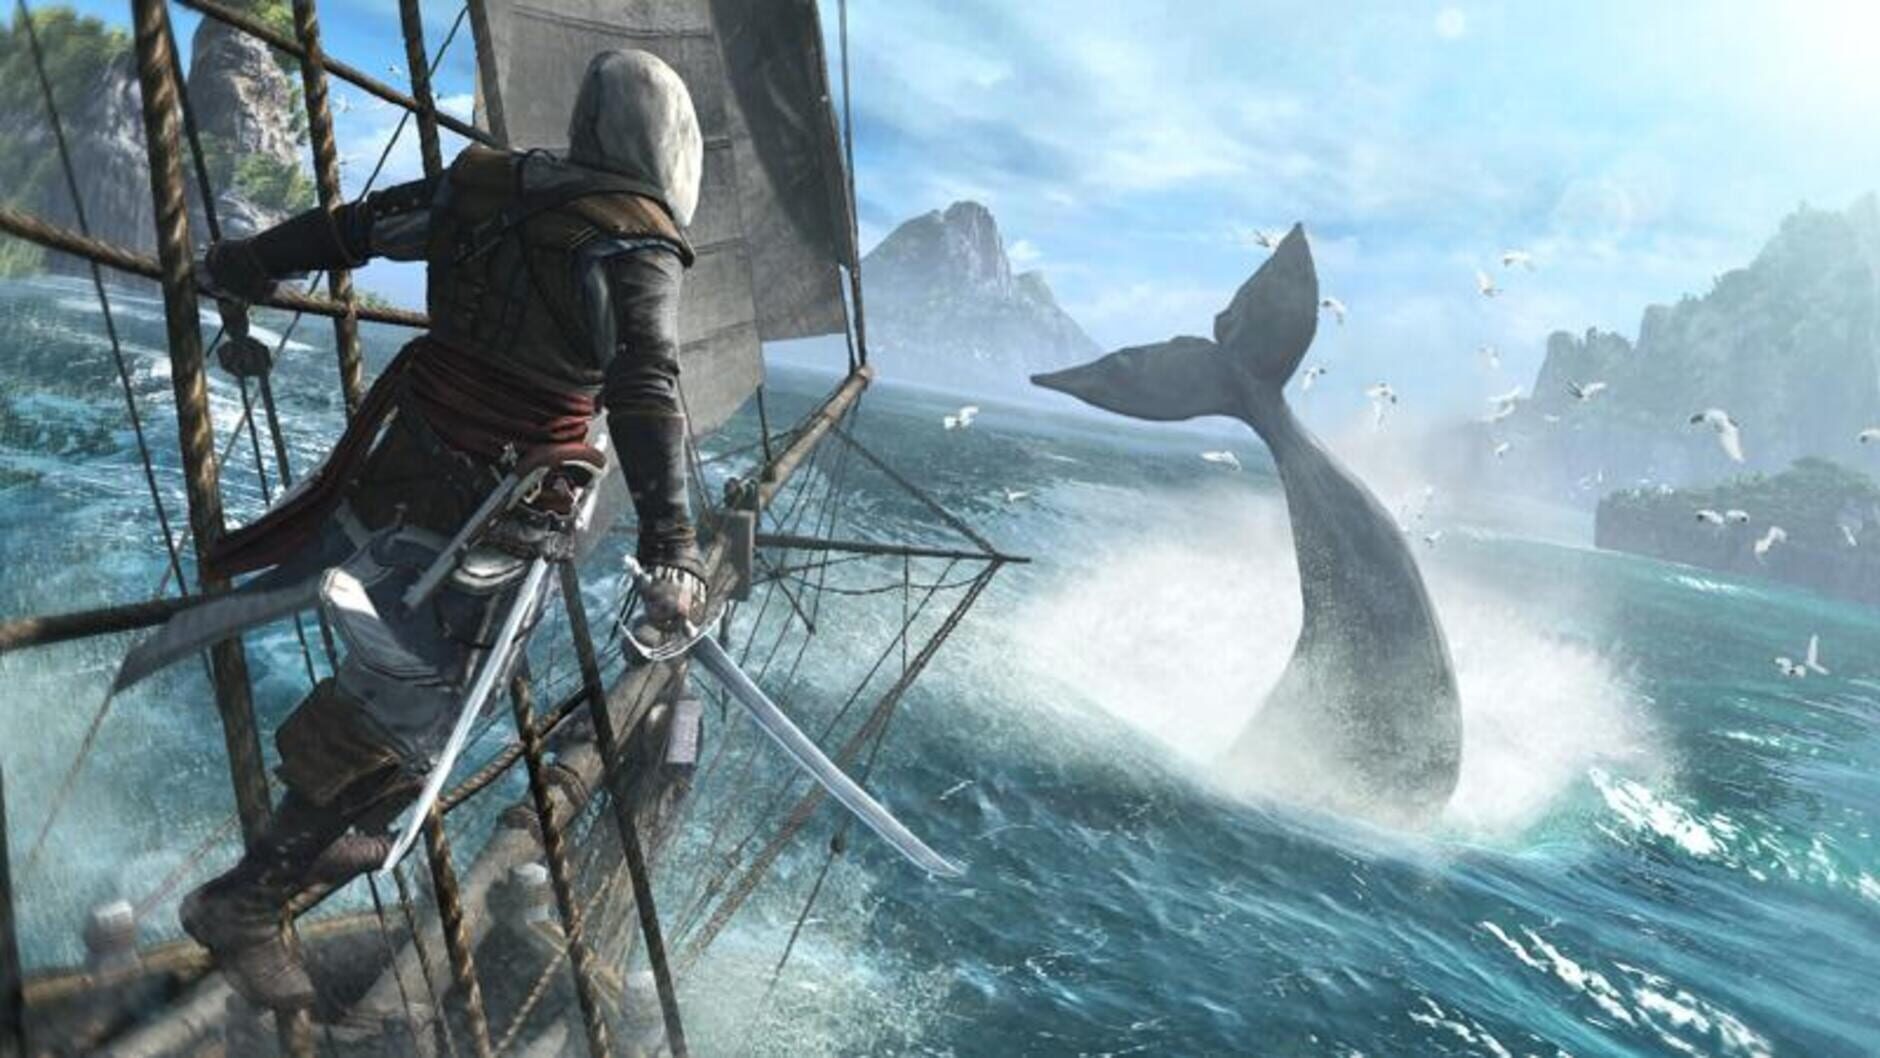 Screenshot for Assassin's Creed IV Black Flag: Guild of Rogues